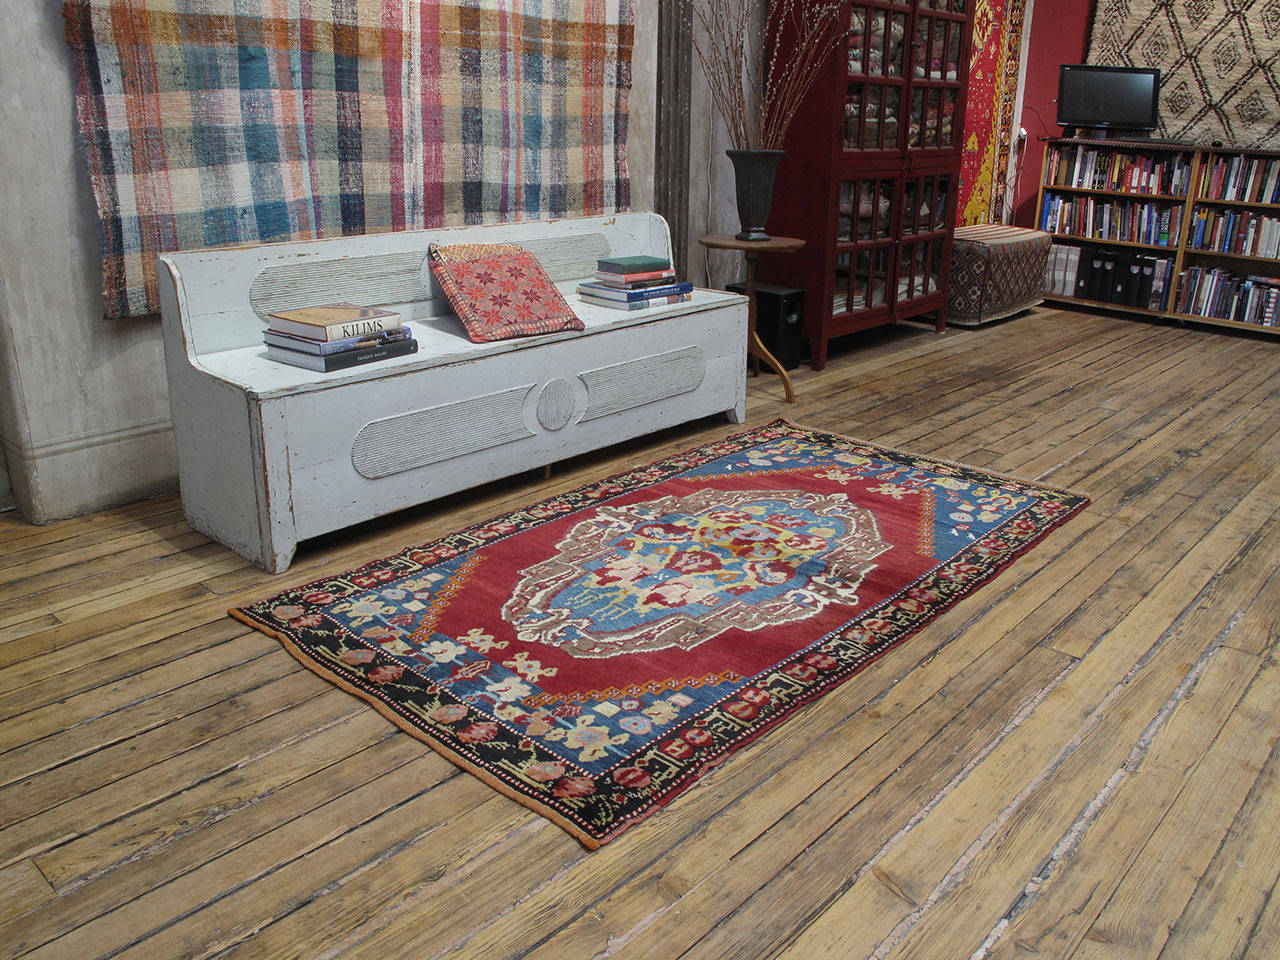 Karabagh rug. Stylized or realistically drawn floral designs in Karabagh, Armenia can be traced back to imperial Russian heritage of this prolific weaving region. This rug is a particularly nice example of the type with a lovely color palette,